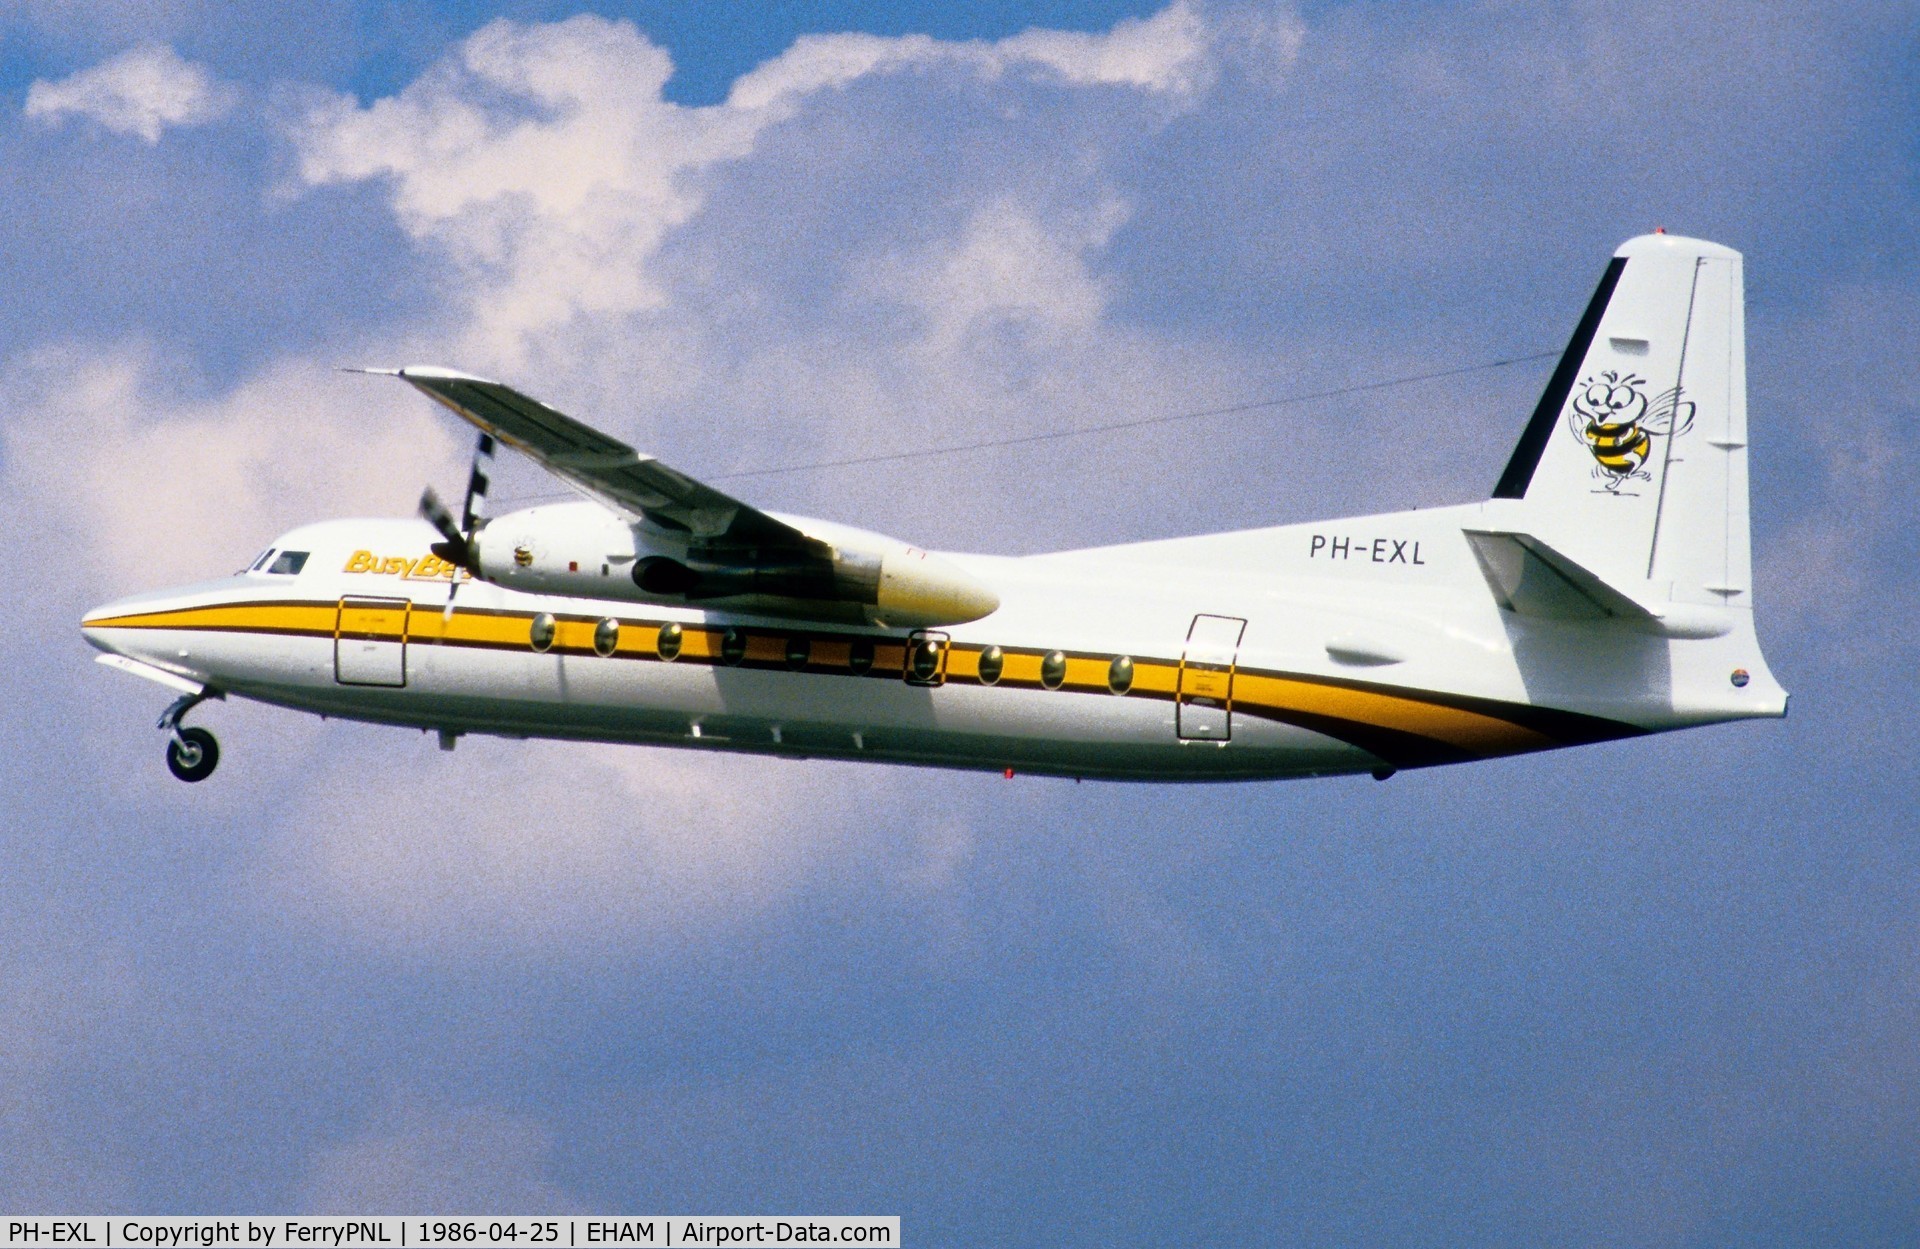 PH-EXL, 1985 Fokker F27-200 Friendship C/N 10675, Delivered to BusyBee as LN-AKD